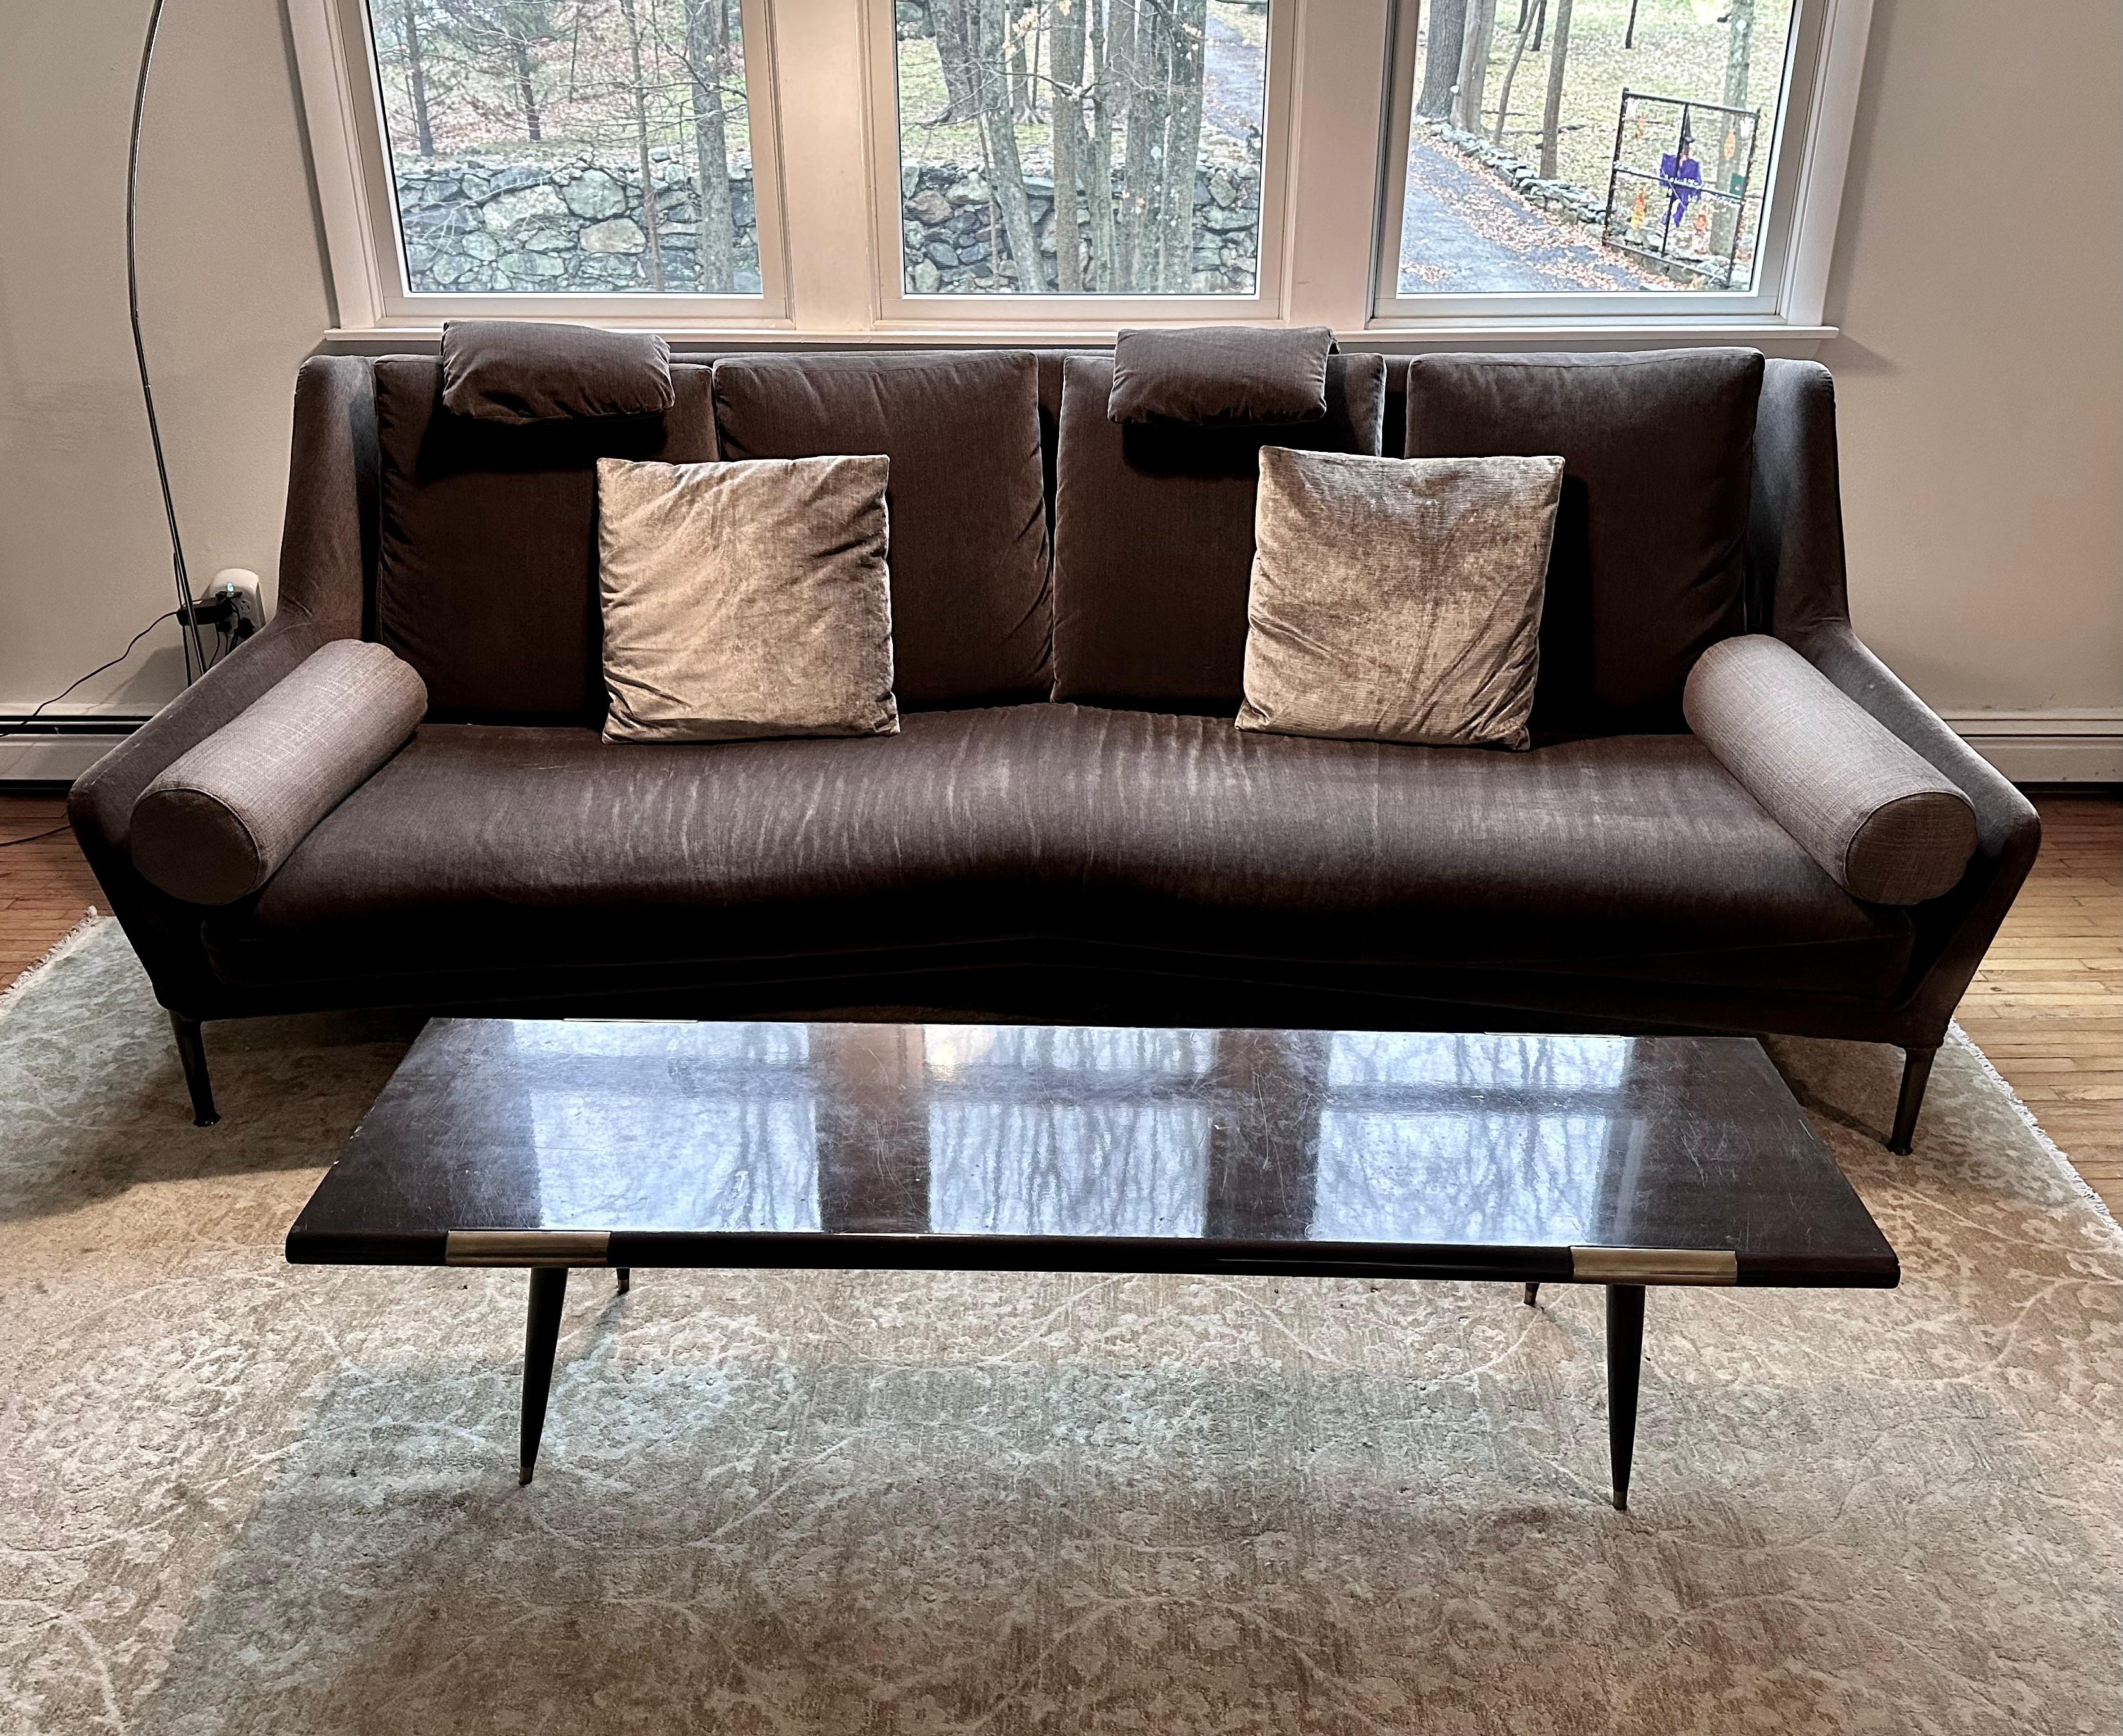 A beautifully styled and gently used B&B Italia Edouard Fabric Sofa, by Antonio Citterio, originally designed in 2016. 

The Édouard sofas have been designed to enhance comfort with a wide seat and a high backrest, which can also be fitted with a